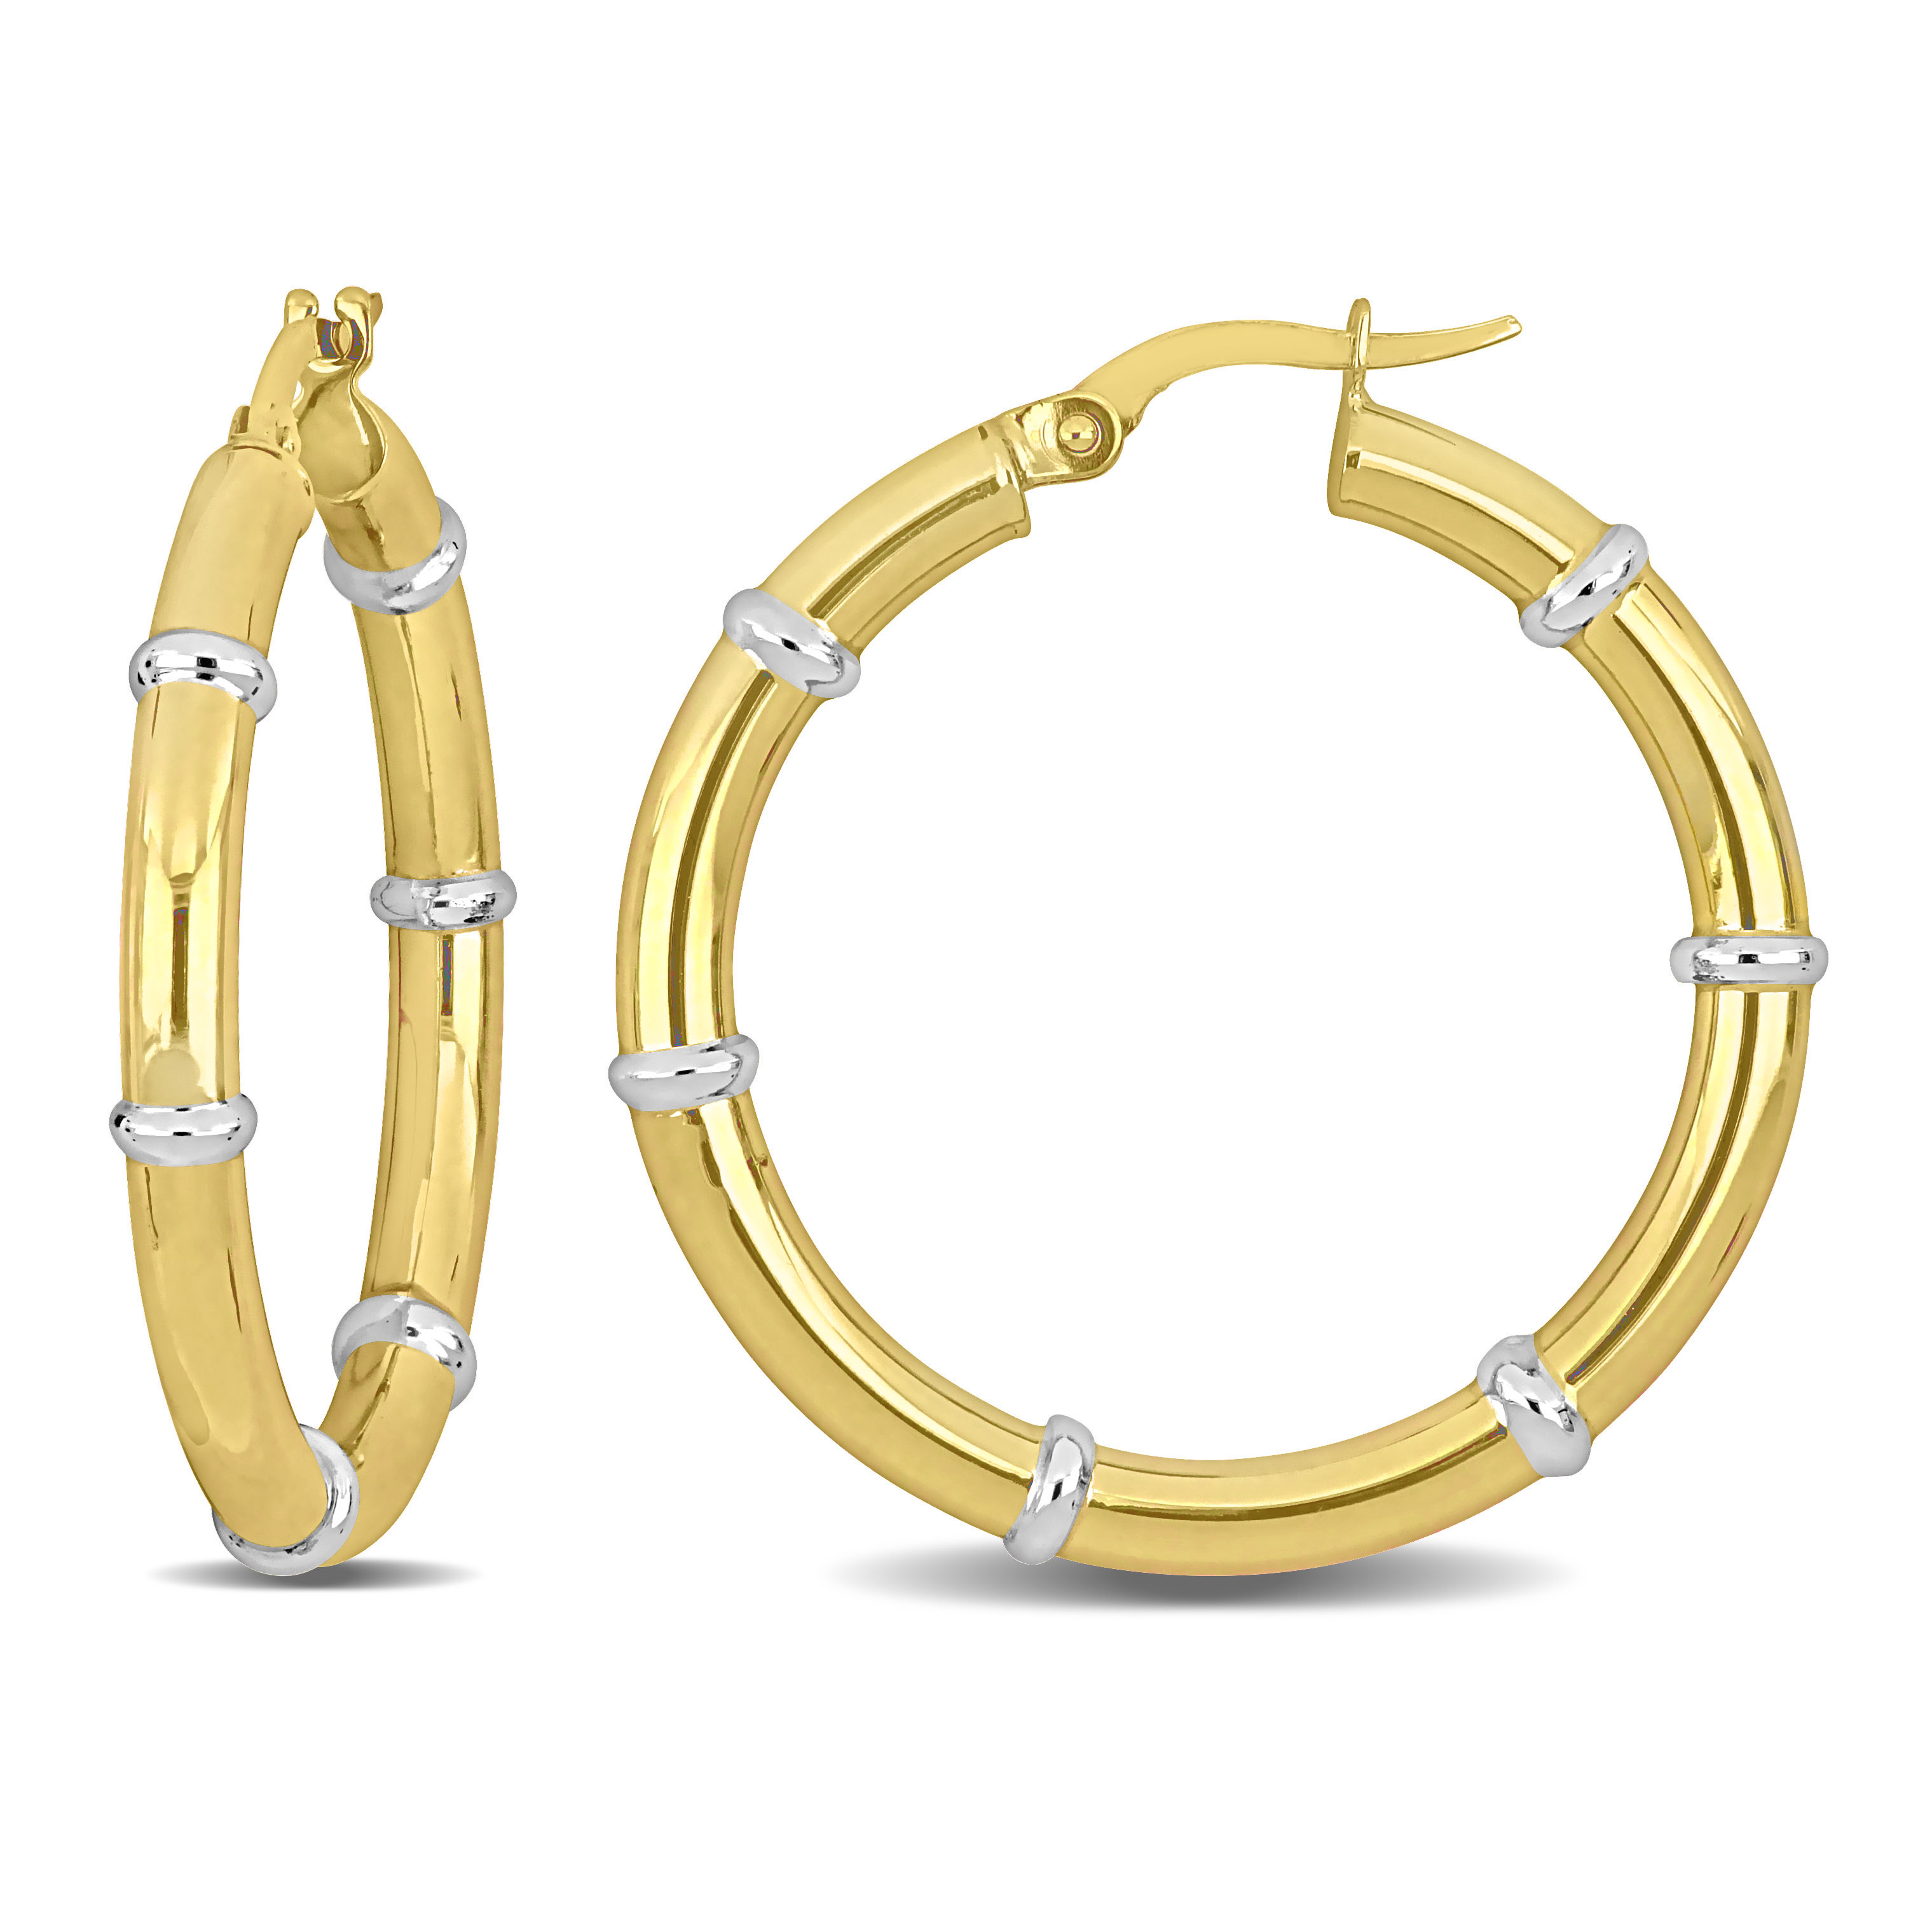 32 MM Station Hoop Earrings in 2-Tone 10k Yellow and White Gold